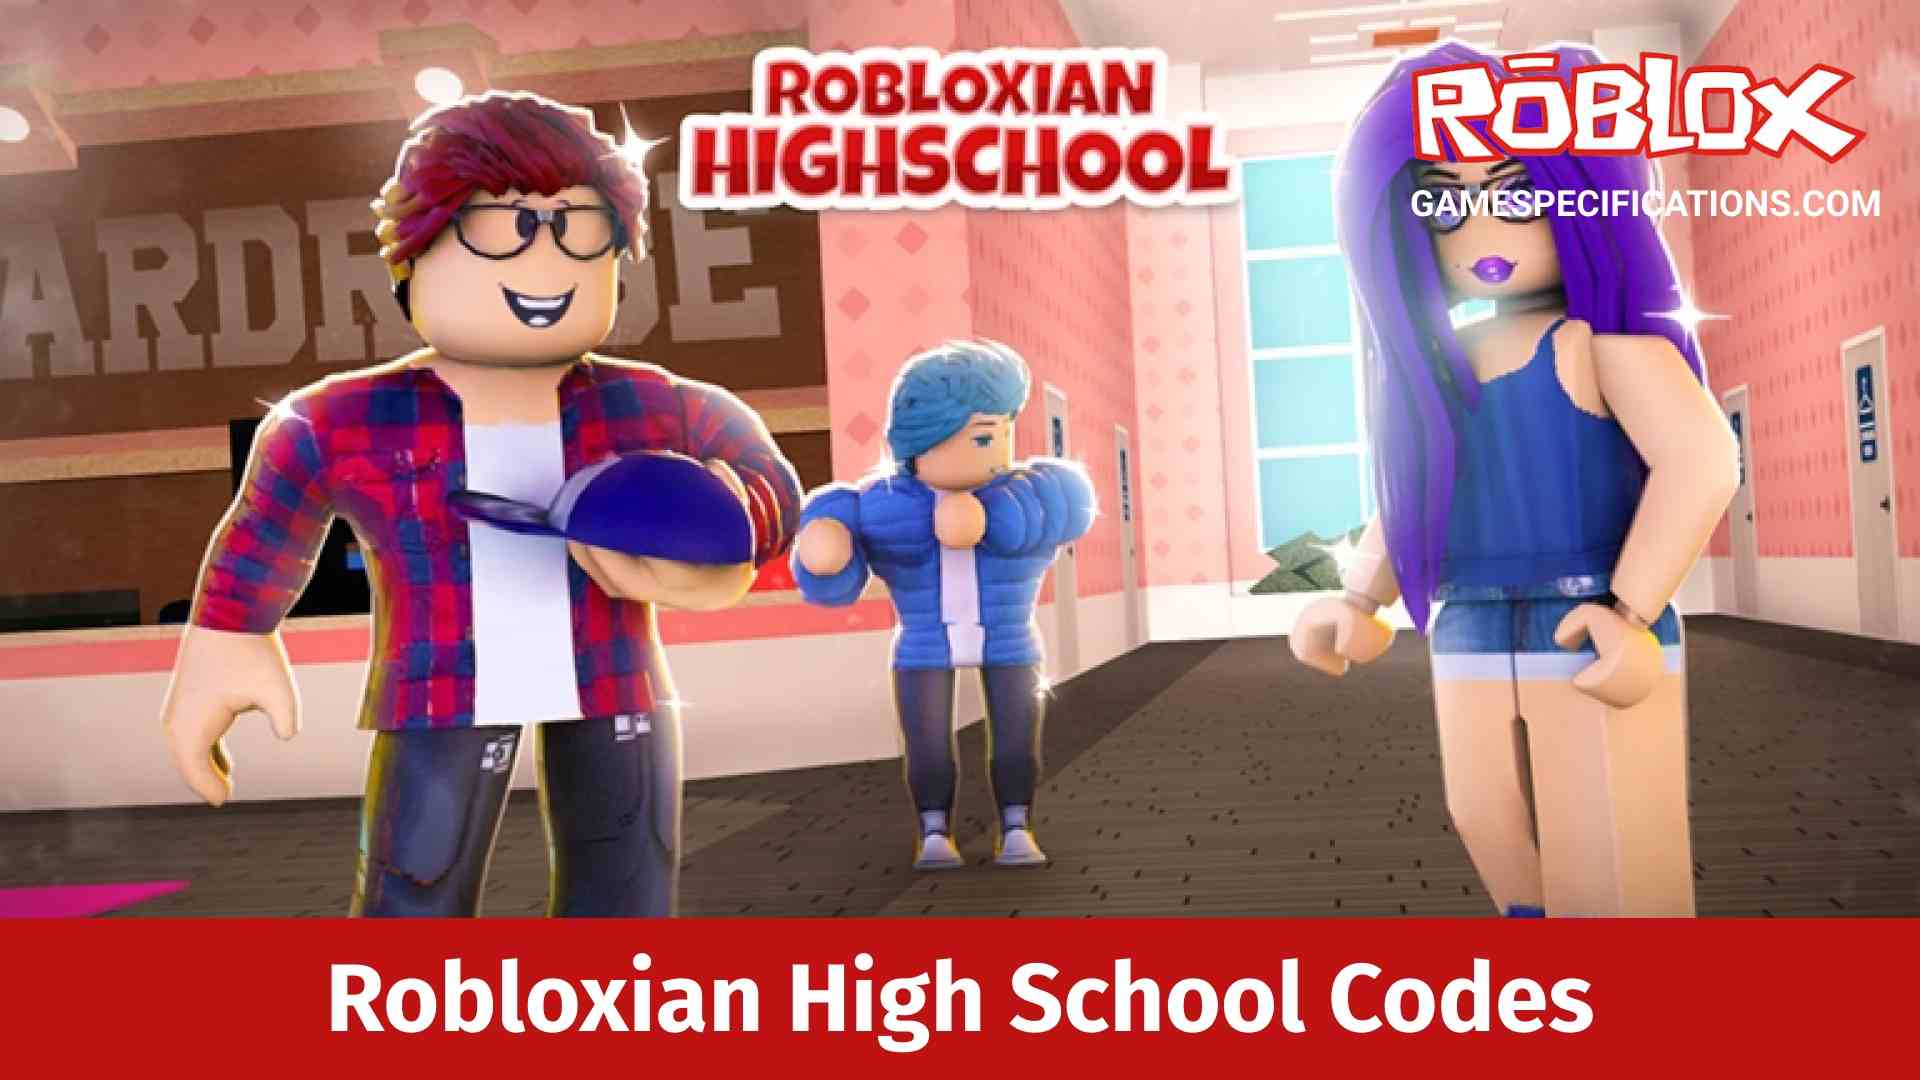 Roblox Robloxian High School Codes 2021 Game Specifications - roblox moving texture